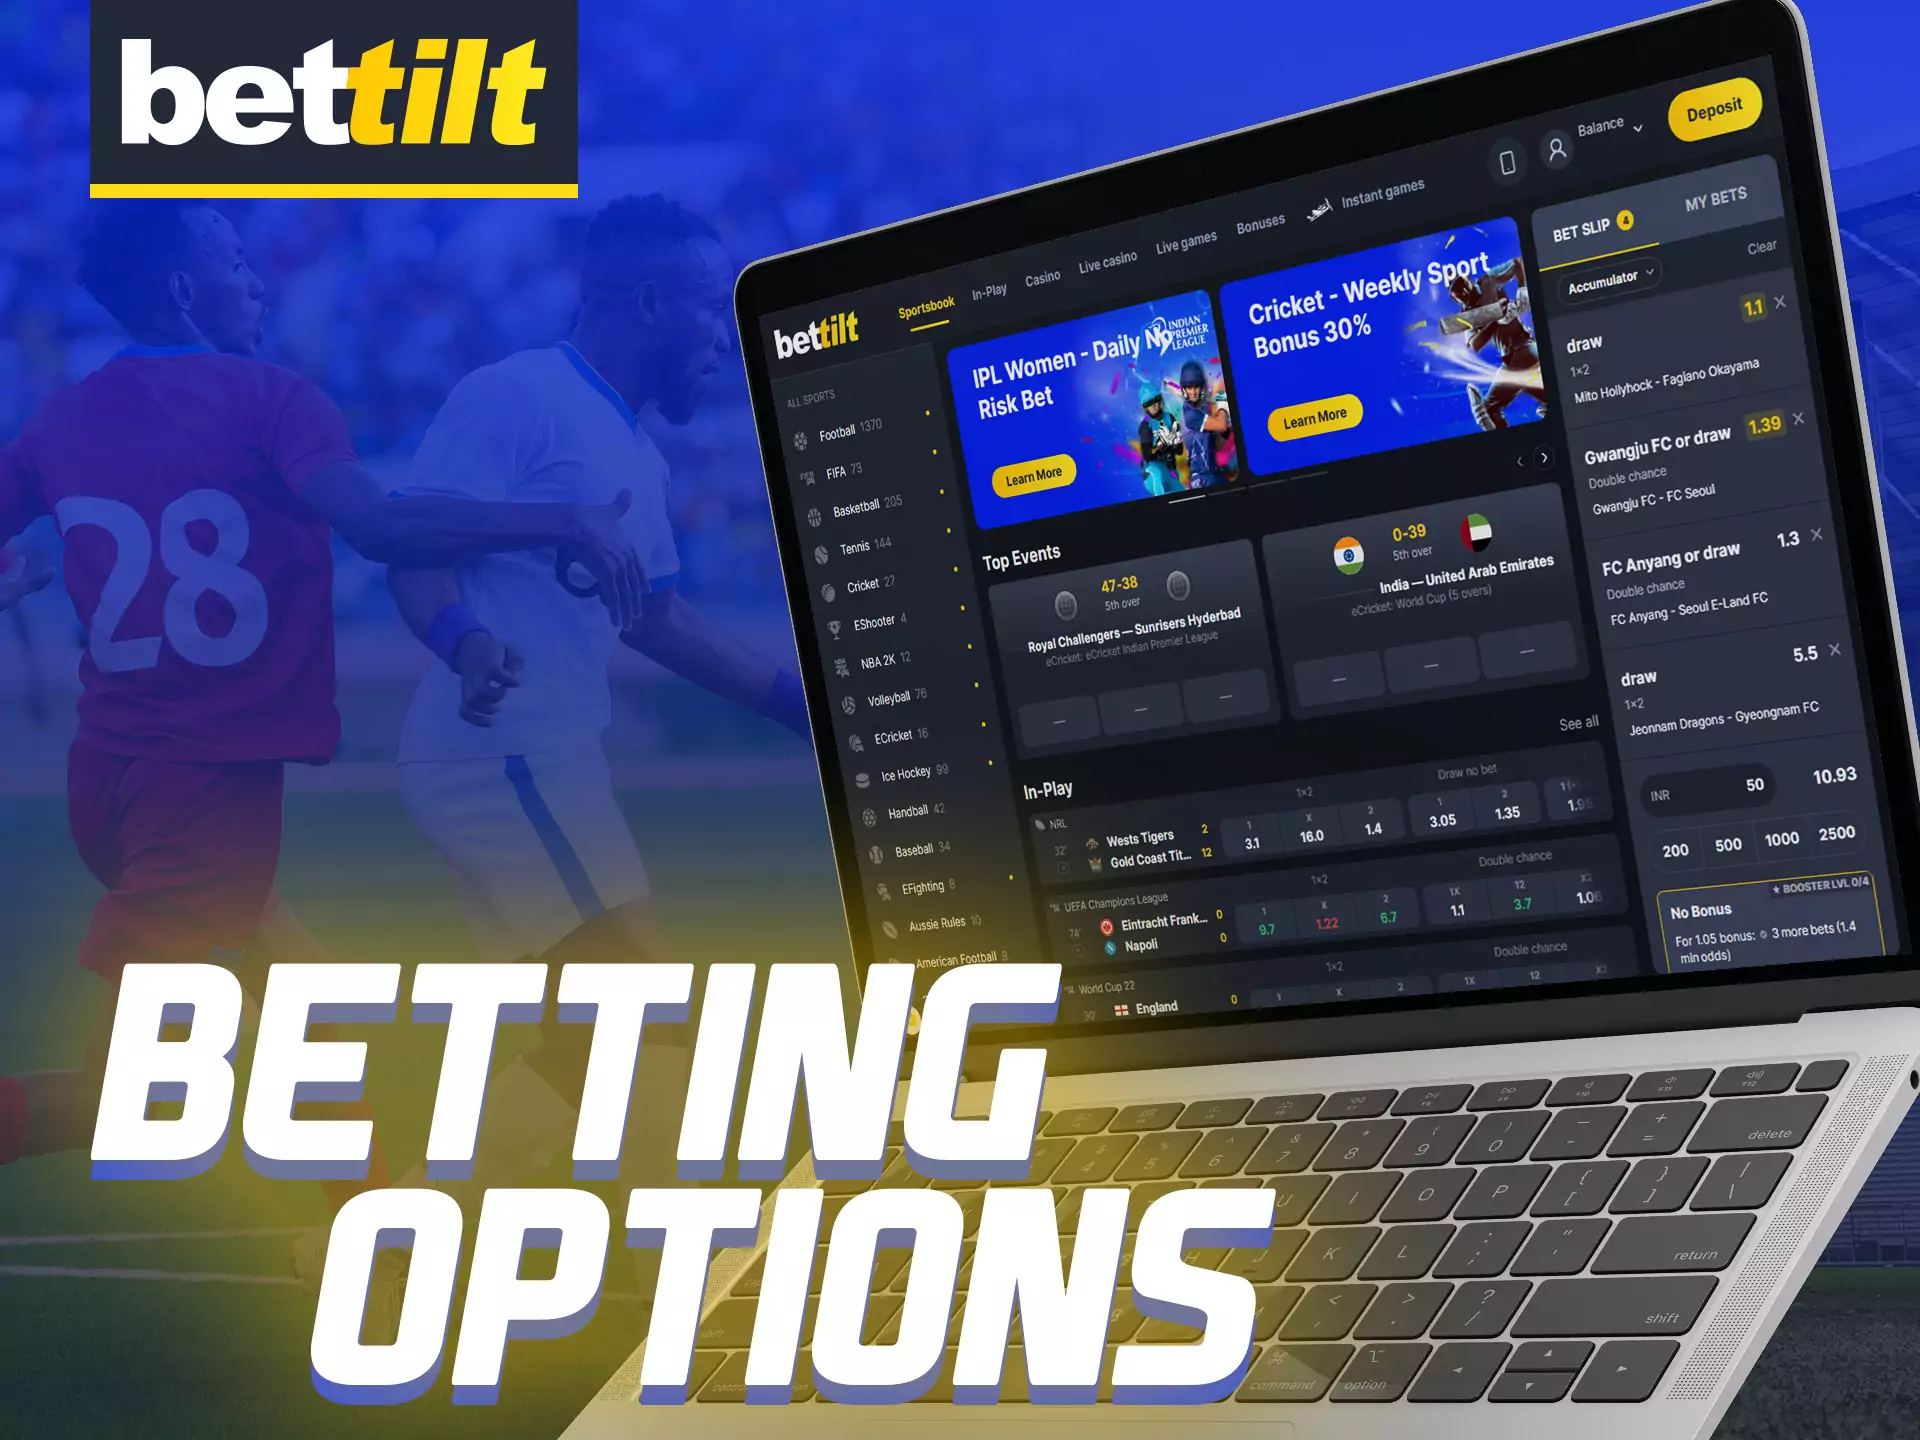 At Bettilt, try different betting options.